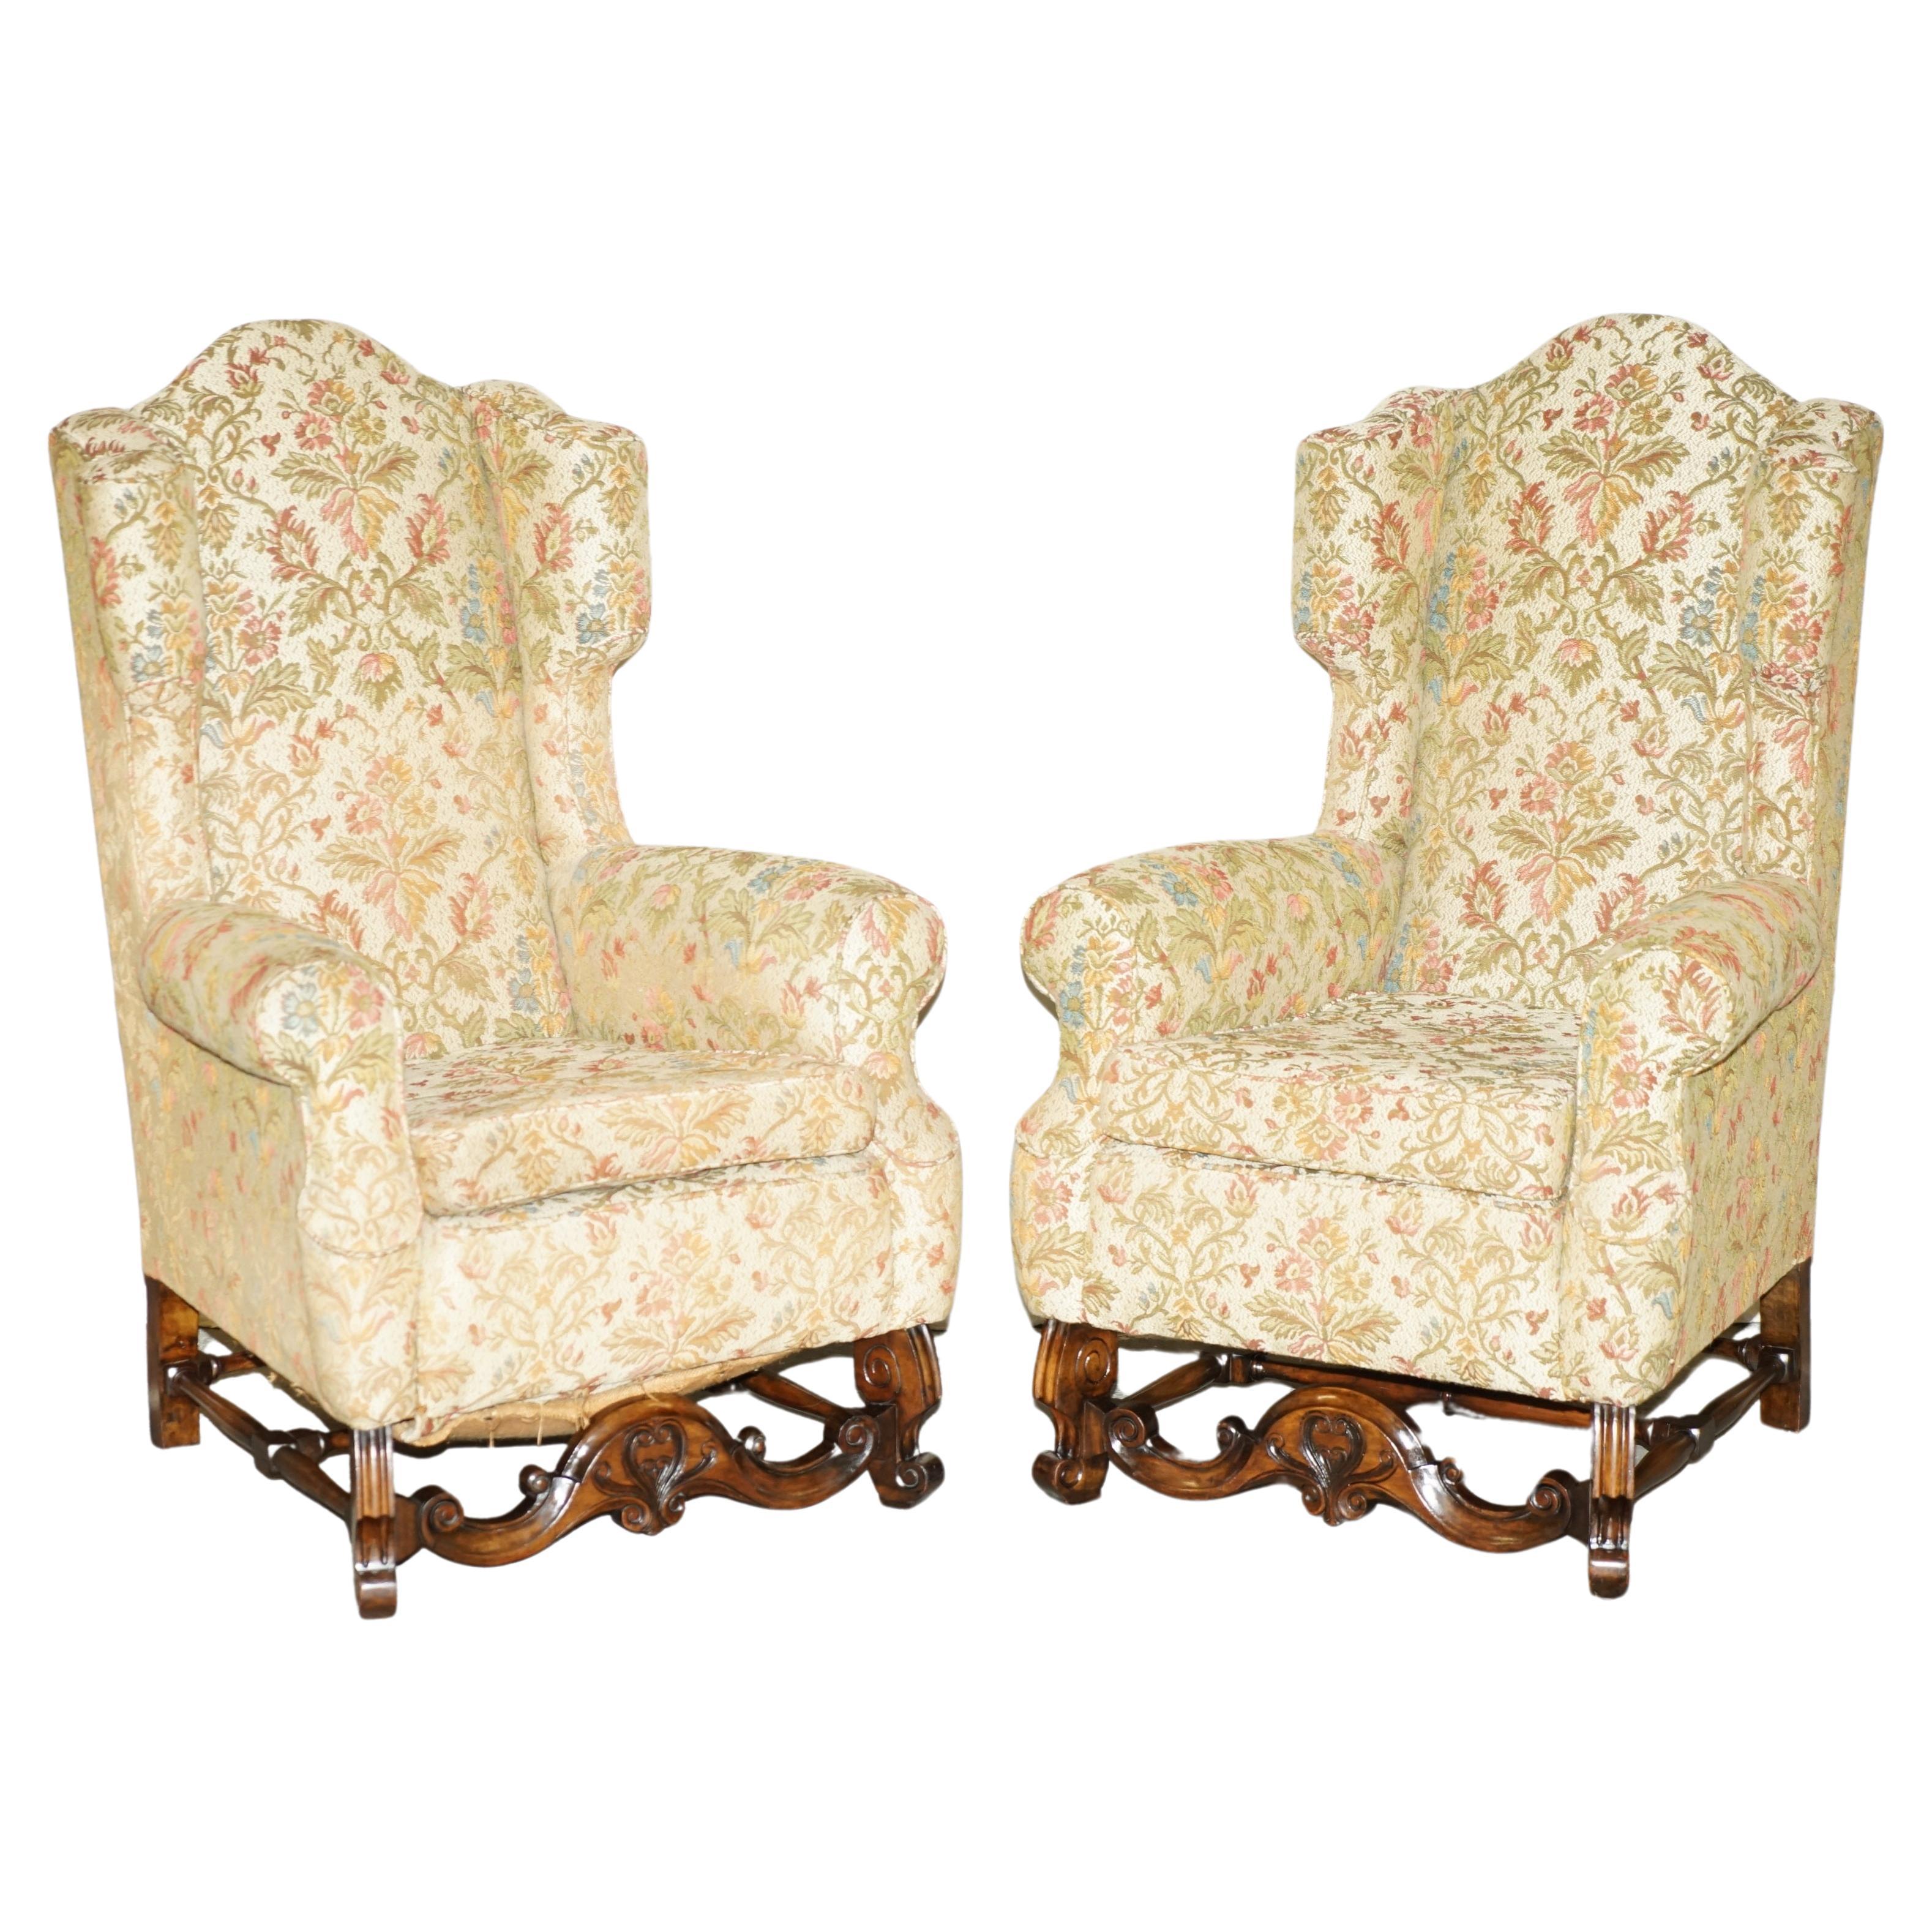 PAIR OF ANTIQUE ITALIAN CAROLEAN HIGH BACK WiNGBACK ARMCHAIRS FOR UPHOLSTERY